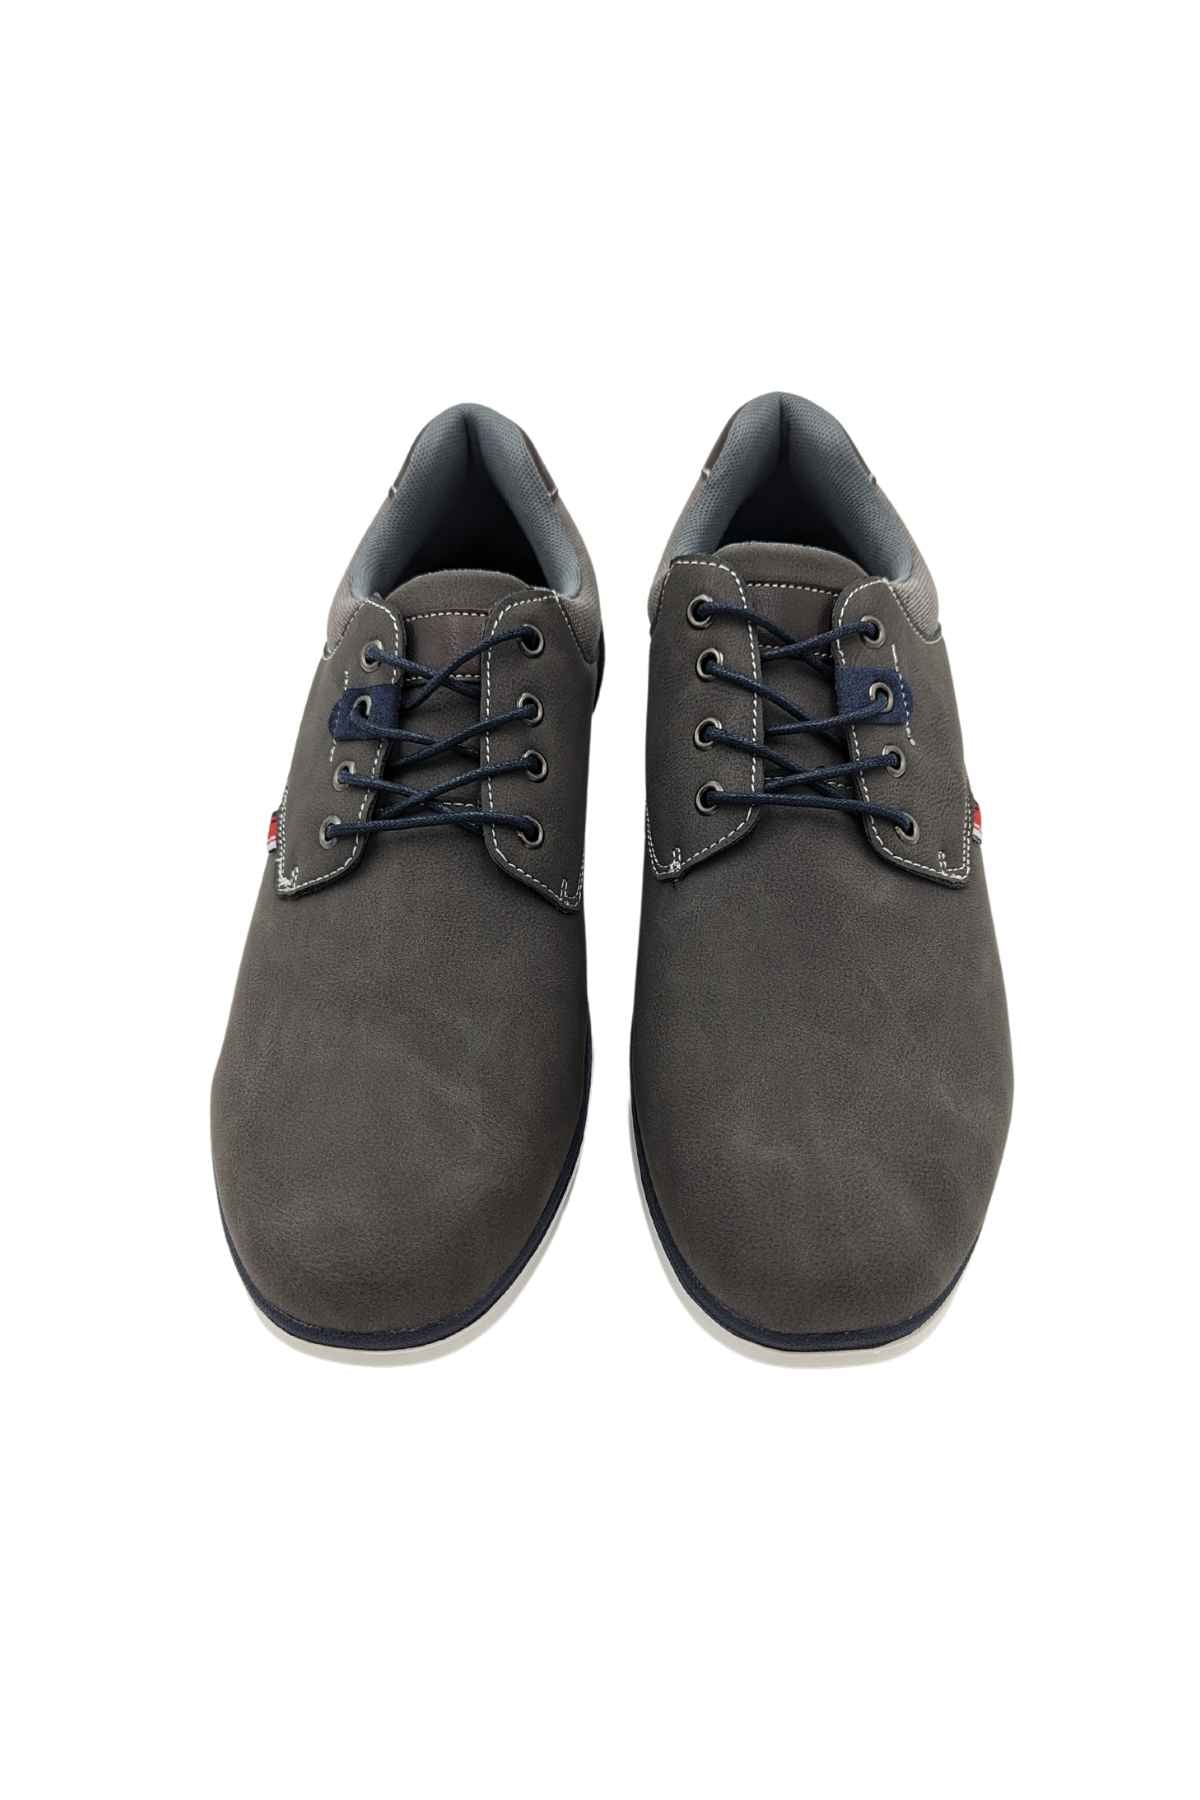 Dolphin Grey Lace Up Shoe-Front view